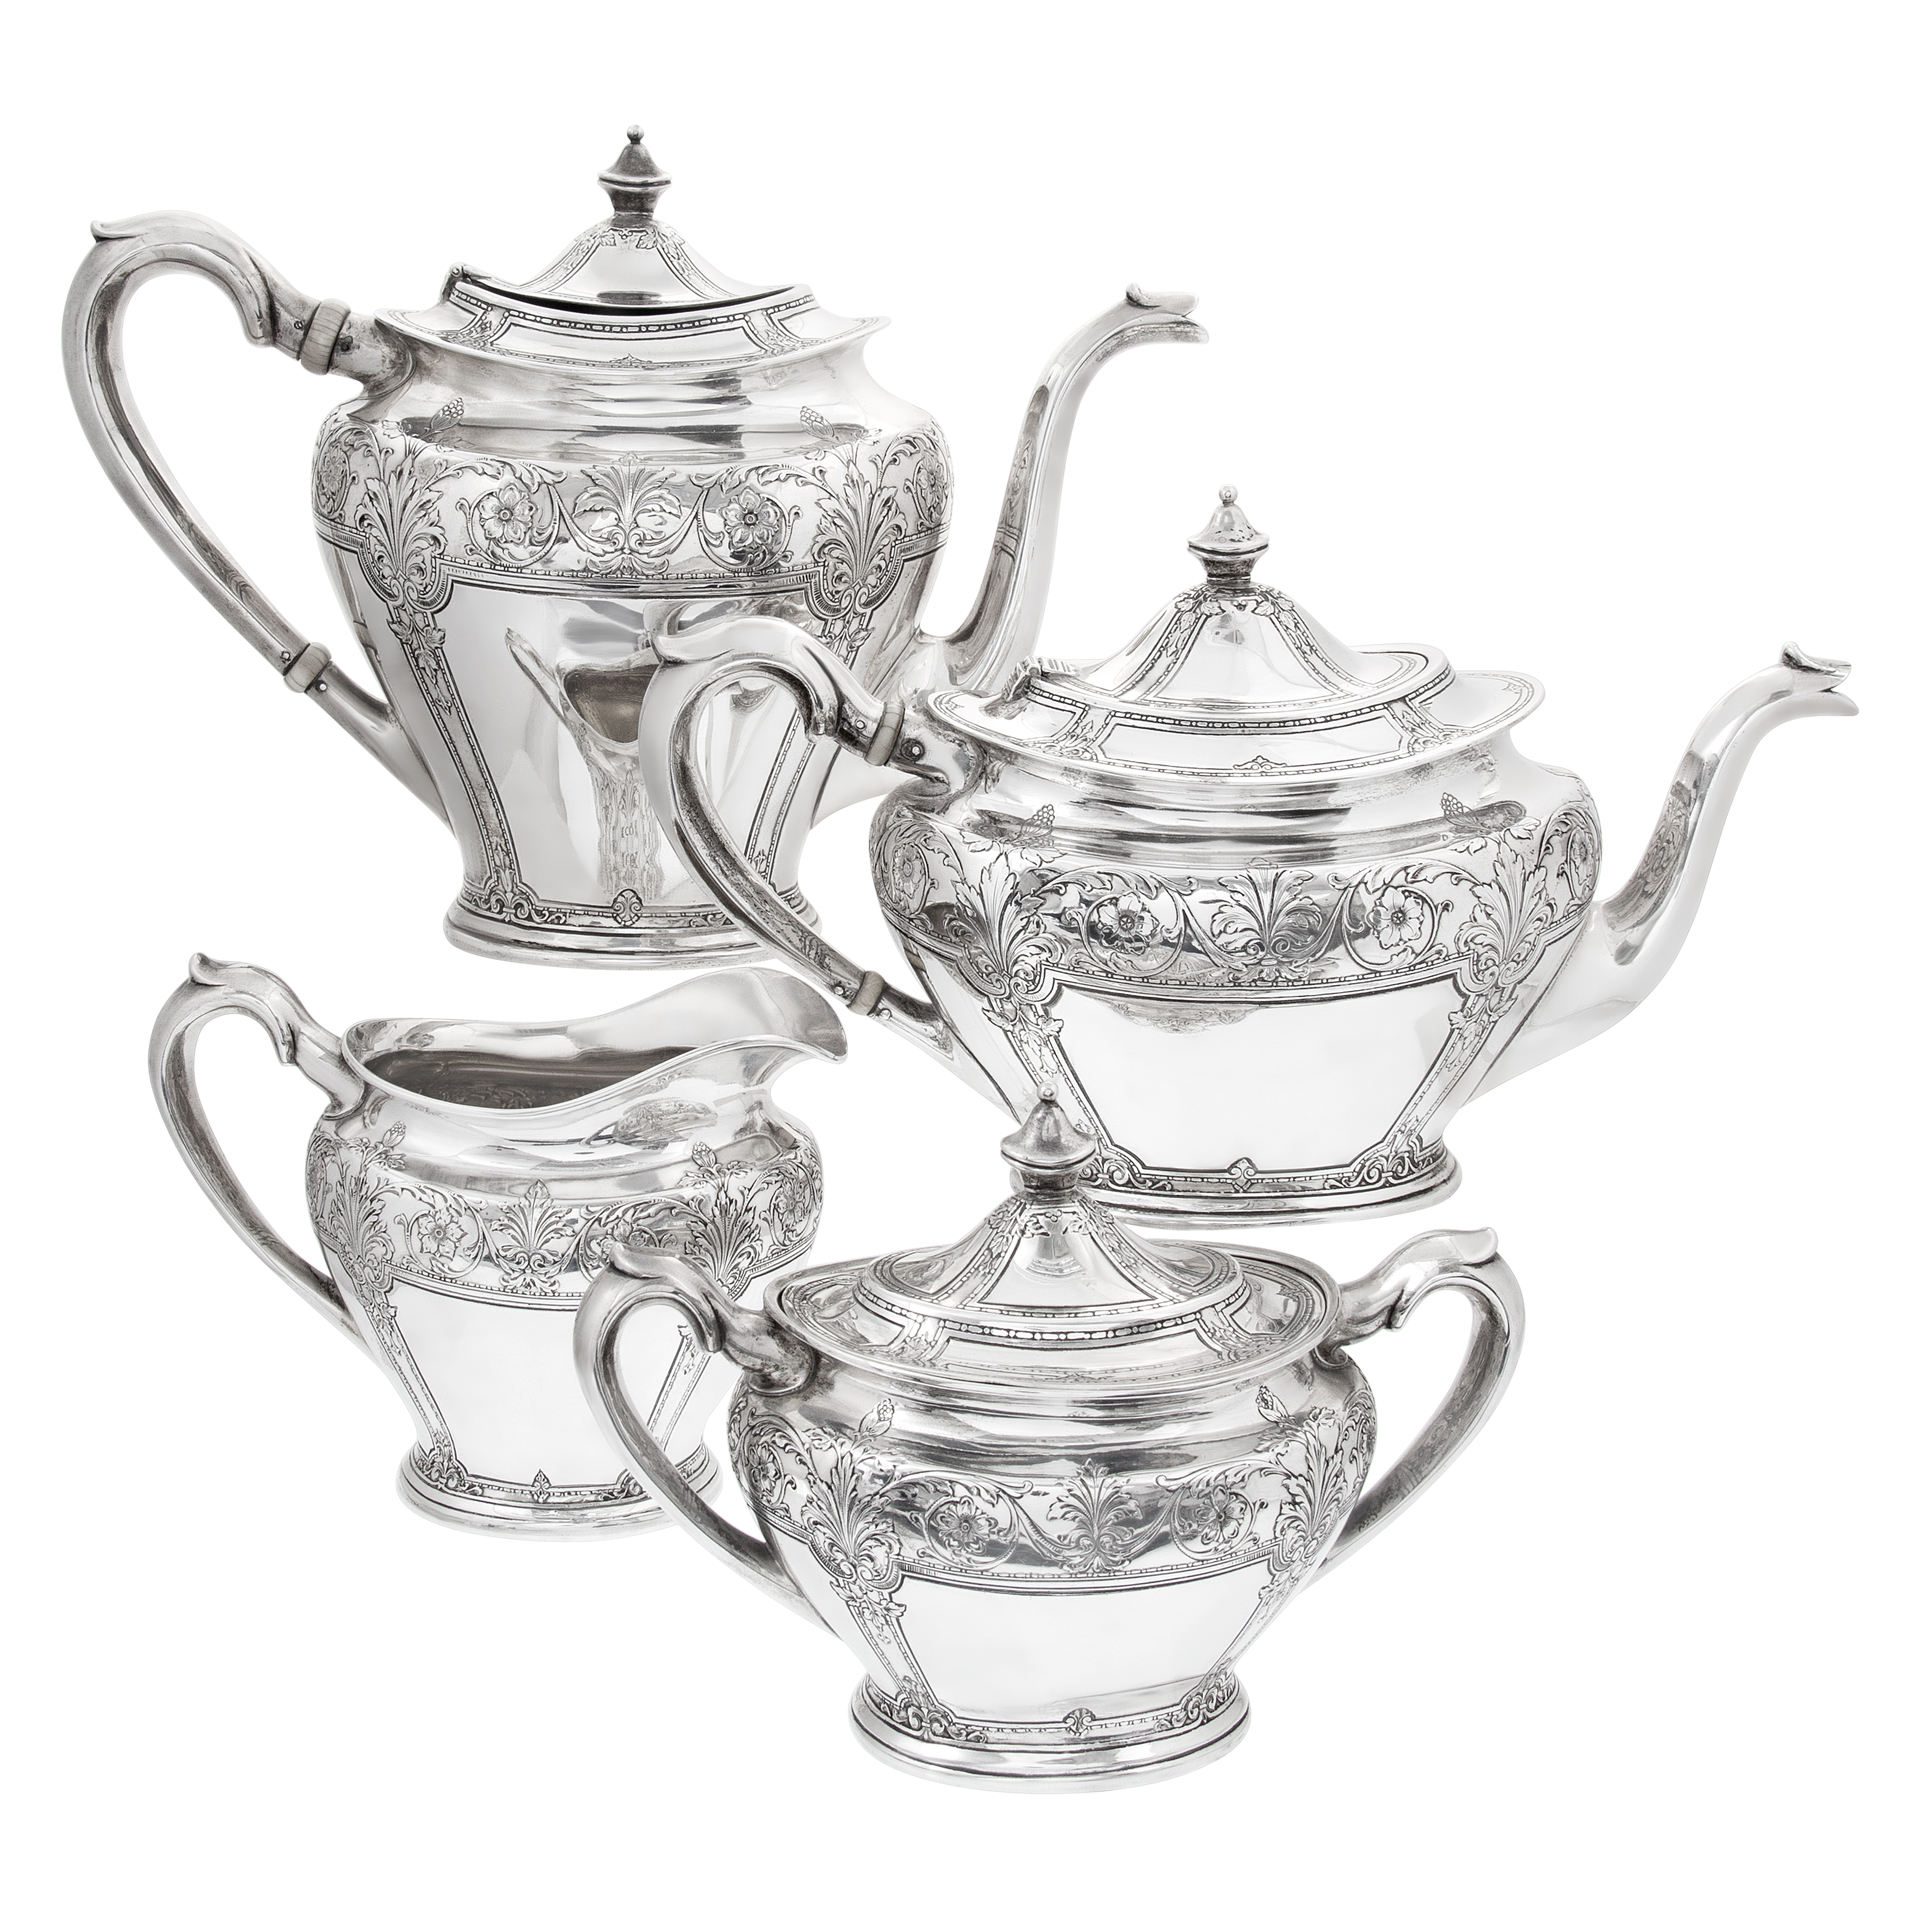 Victorian 4 pieces tea & coffee sterling silver set, by the Lebkuecher & Co Sterling Silver Company from Newark, New Jersey